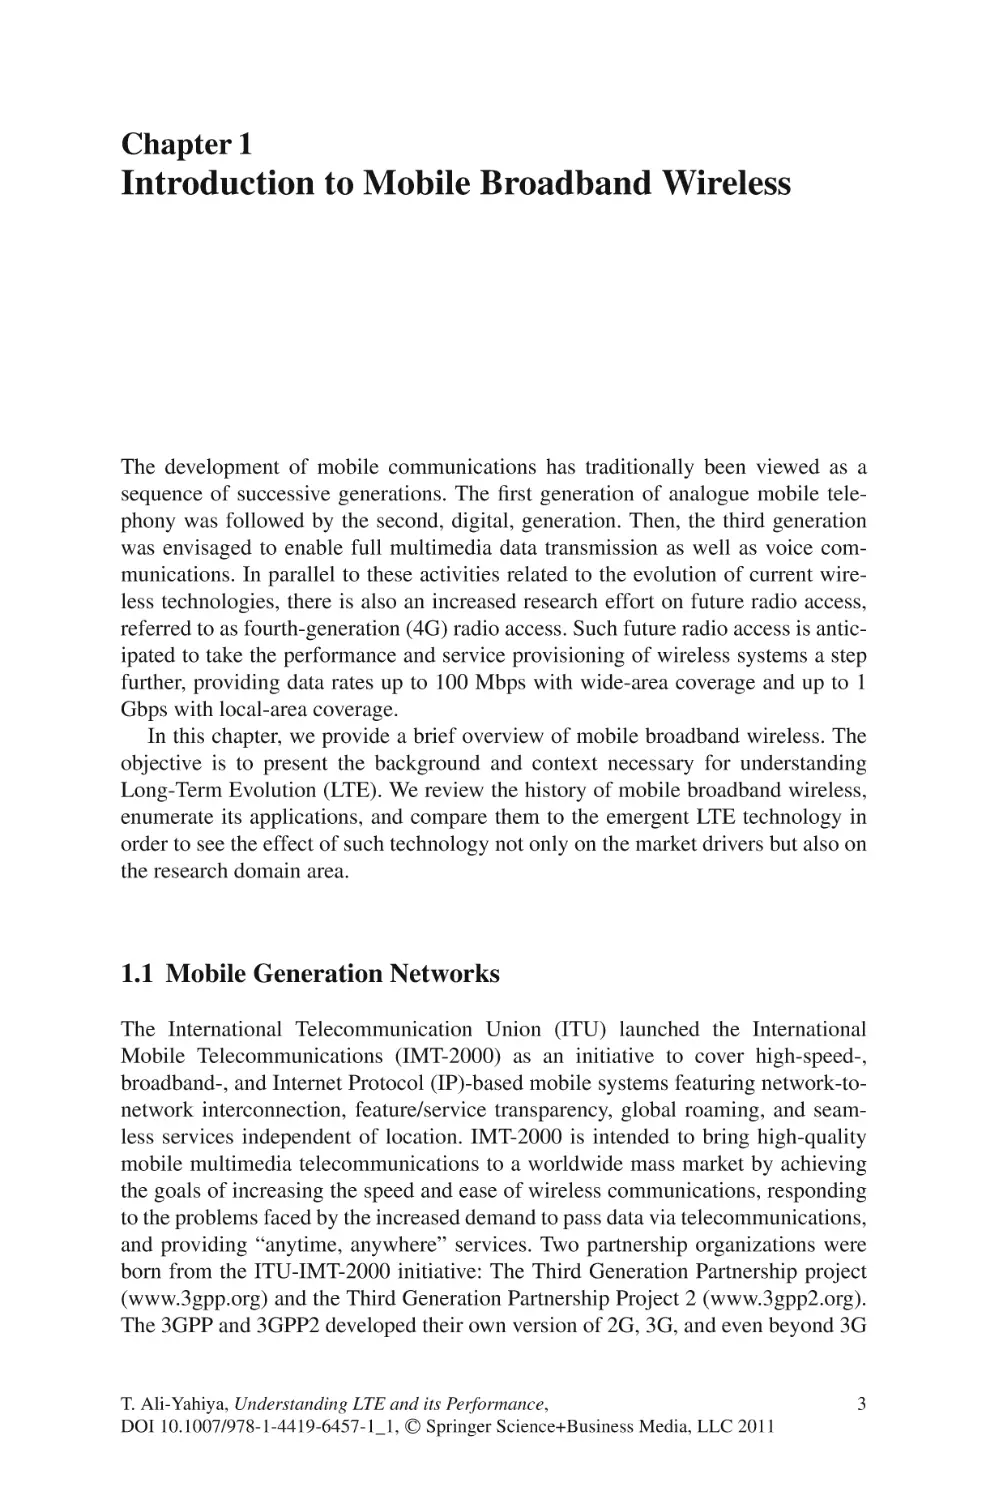 1  Introduction to Mobile Broadband Wireless
1.1  Mobile Generation Networks